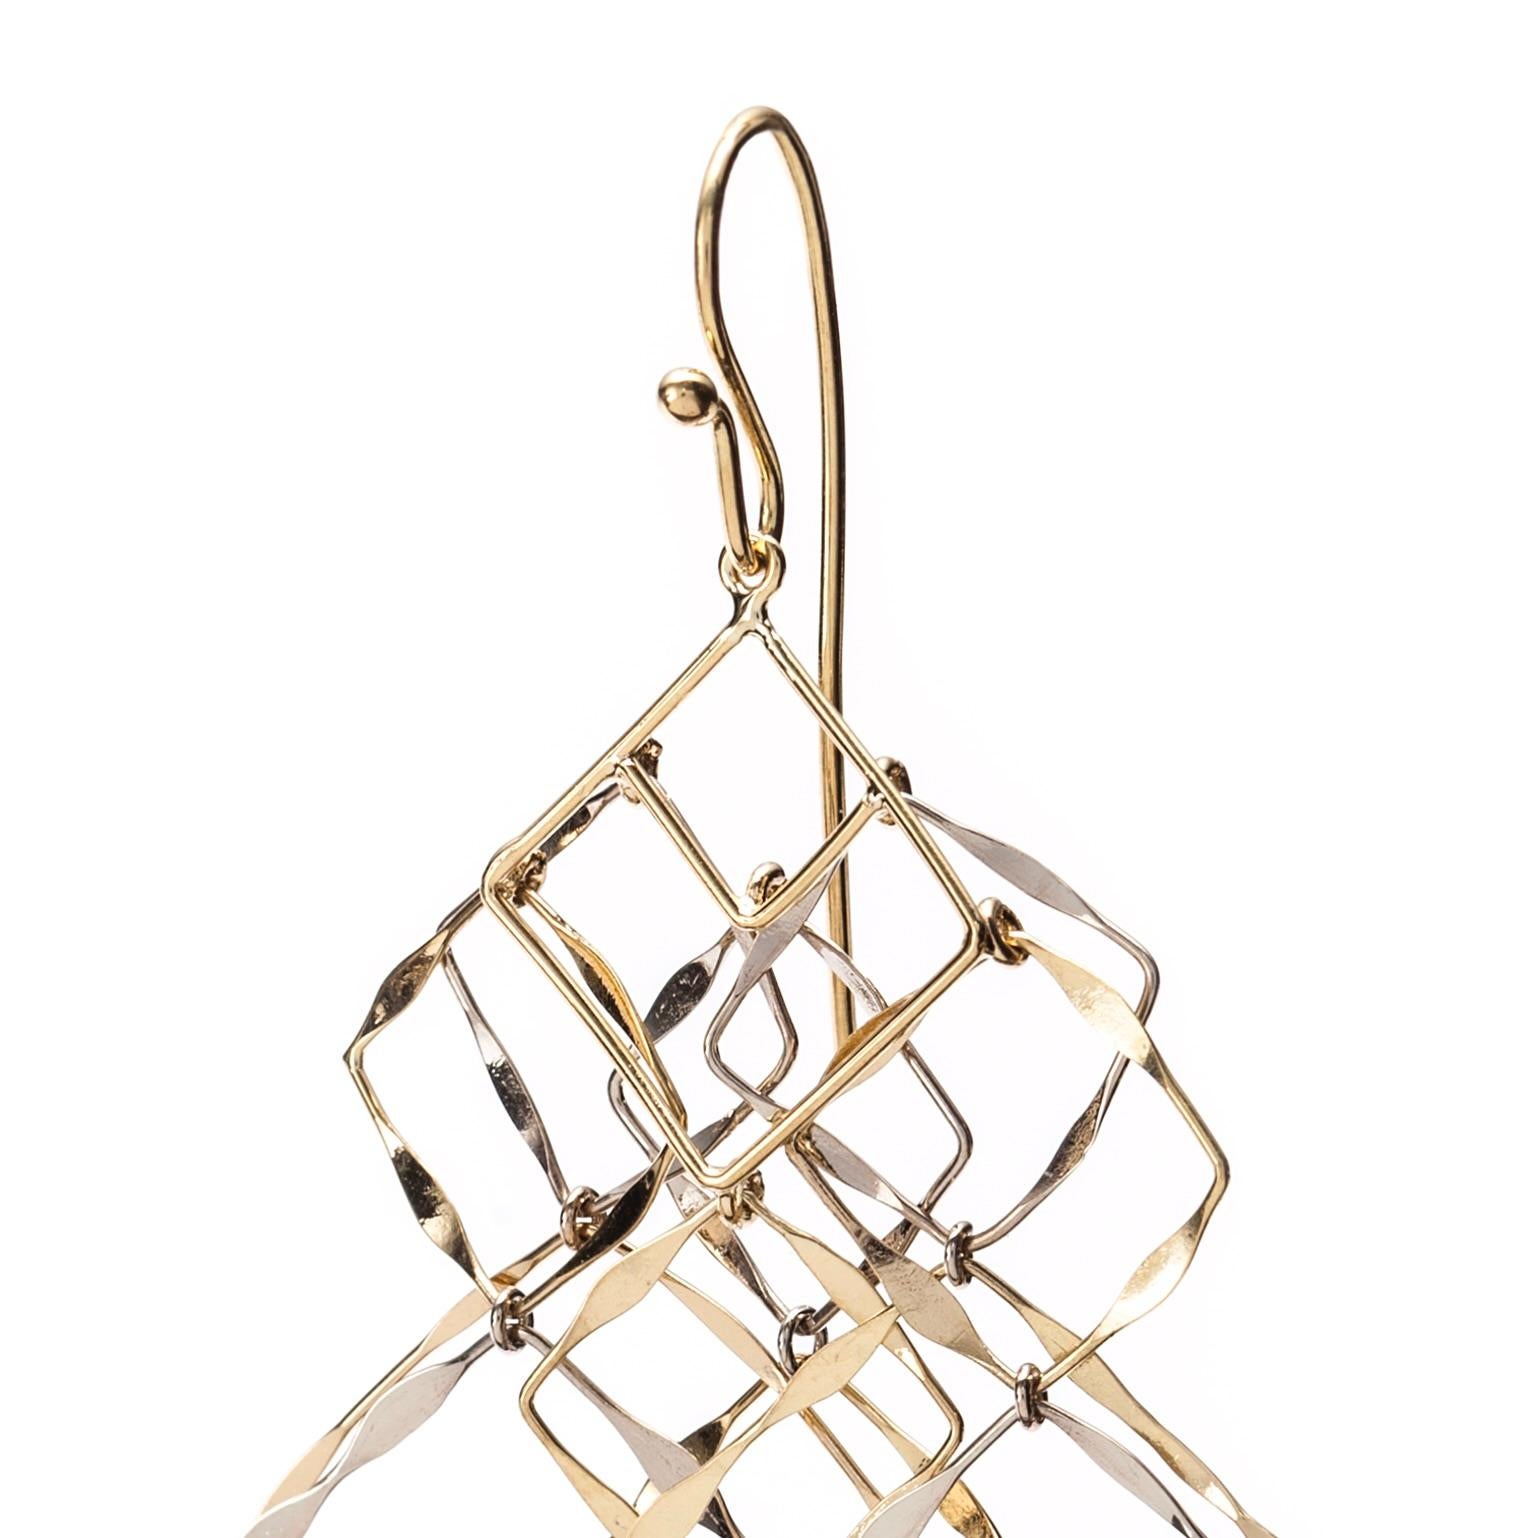 These hook earrings are hand crafted in 18K yellow and white gold. The hammered gold wire reflects light framing your features with a delicate sparkle. The earring come with tiny transparent silicone stoppers for extra security. We strongly suggest